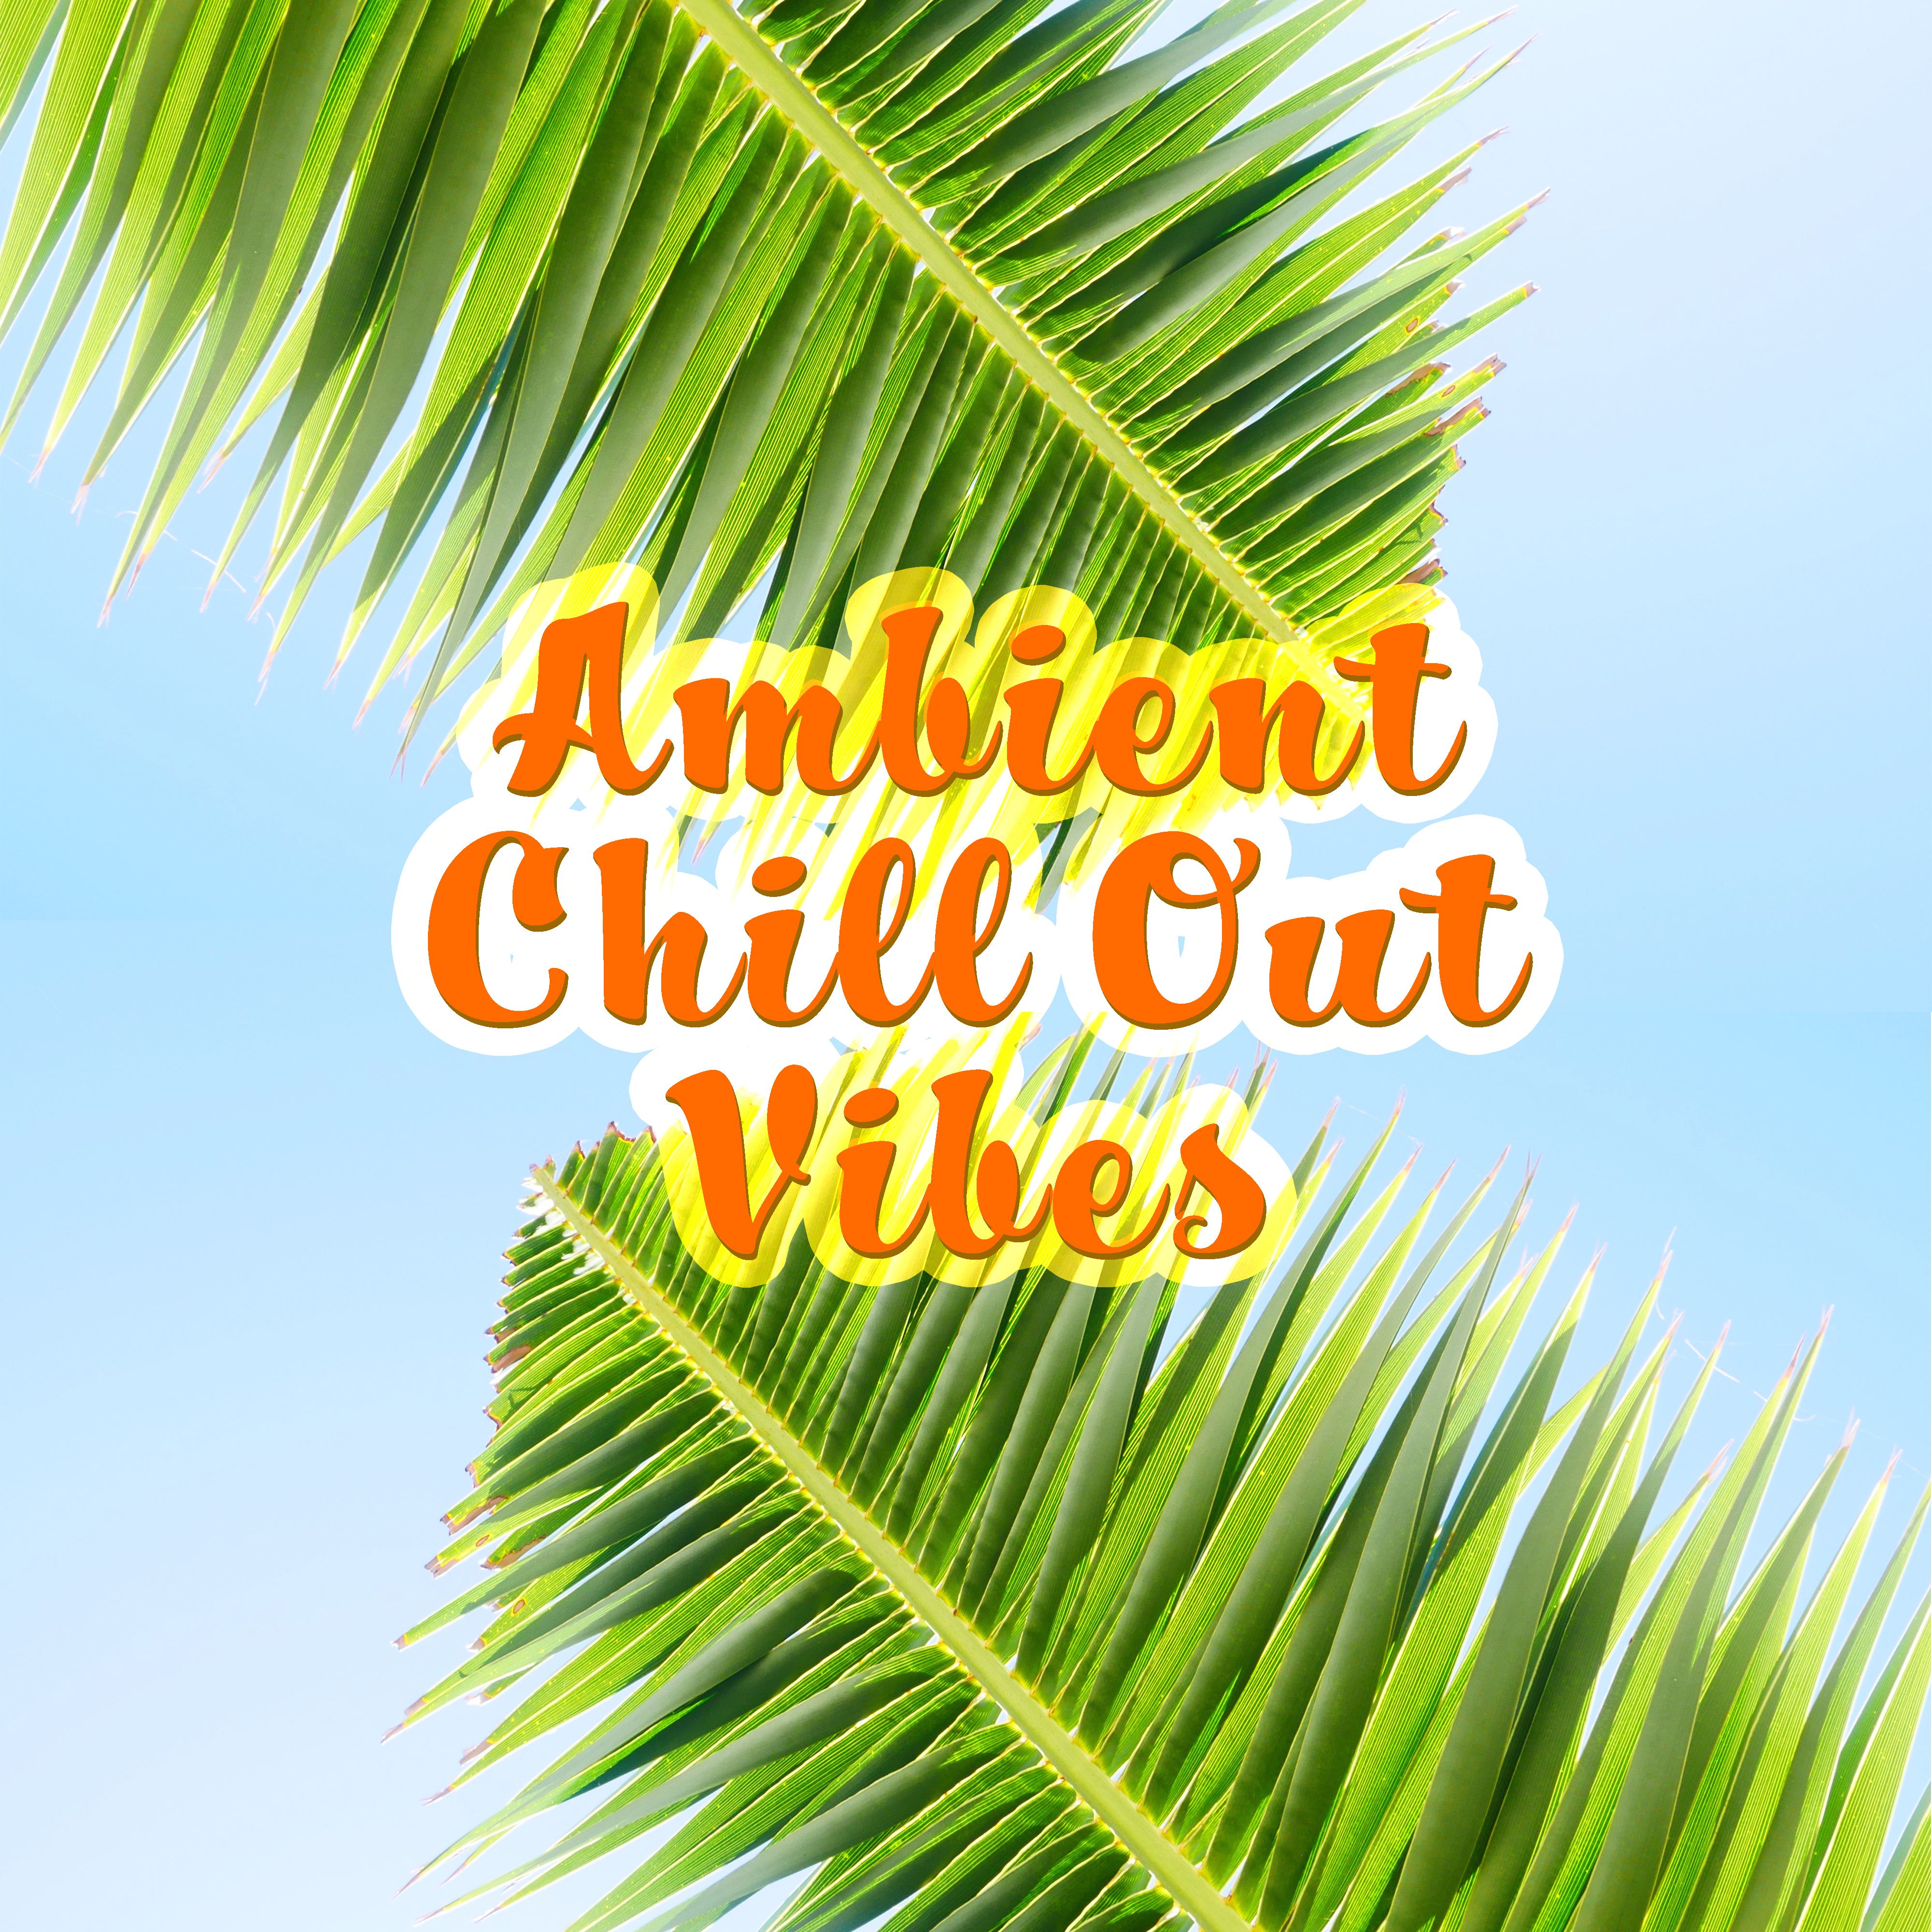 Ambient Chill Out Vibes – Soft Summer Beats, Relaxing Melodies, Chill Out Sounds, Beach Lounge